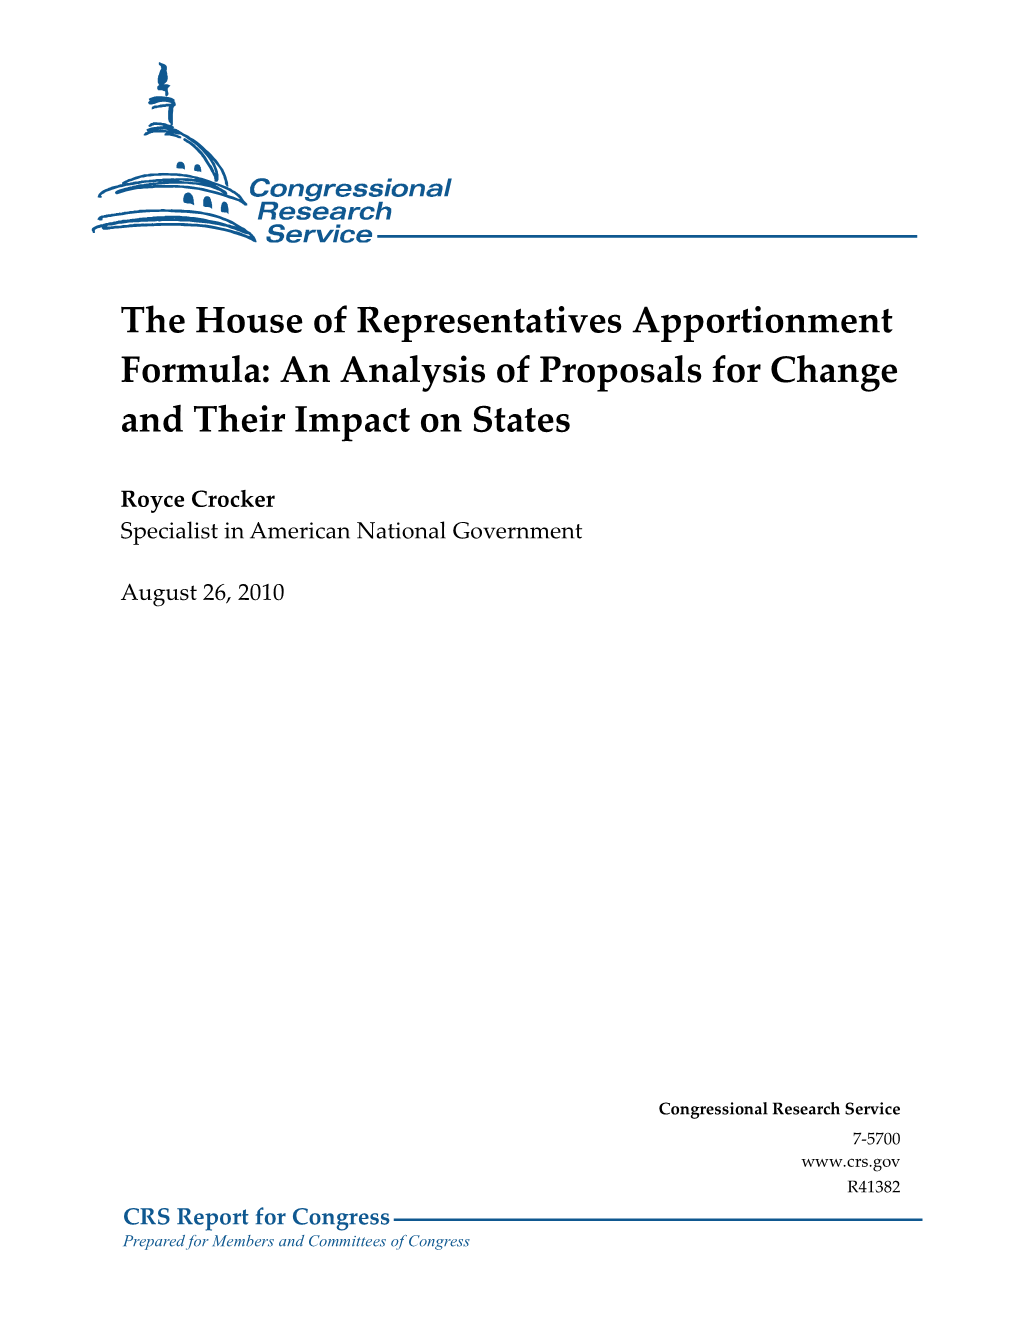 The House of Representatives Apportionment Formula: an Analysis of Proposals for Change and Their Impact on States